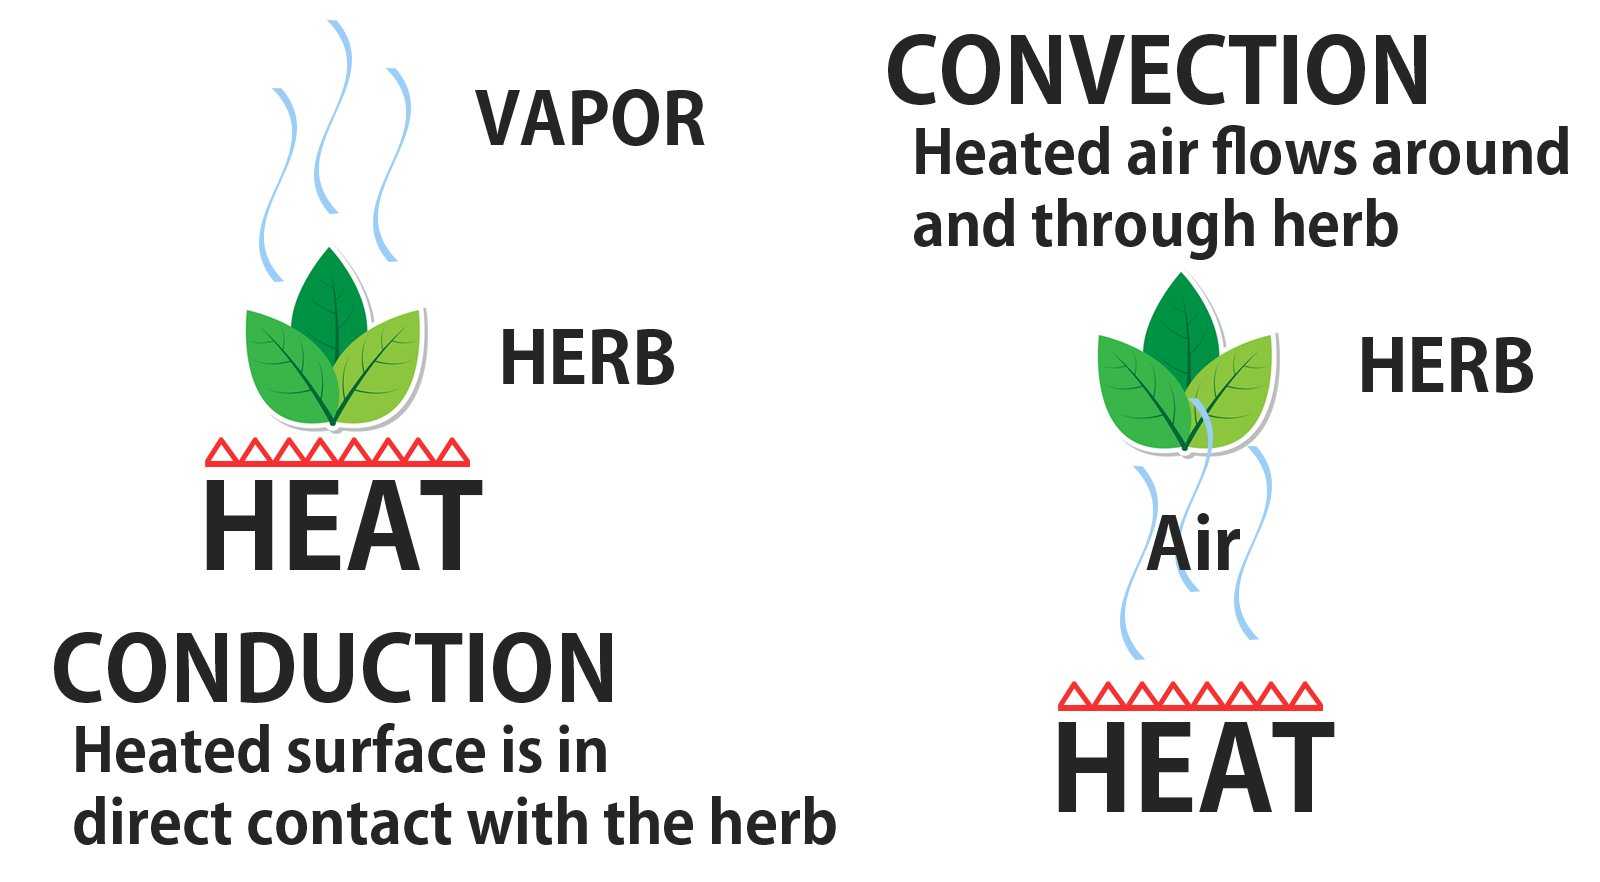 Concudtion vs Convection Beginners Guide to Dry Herb Vaporizers